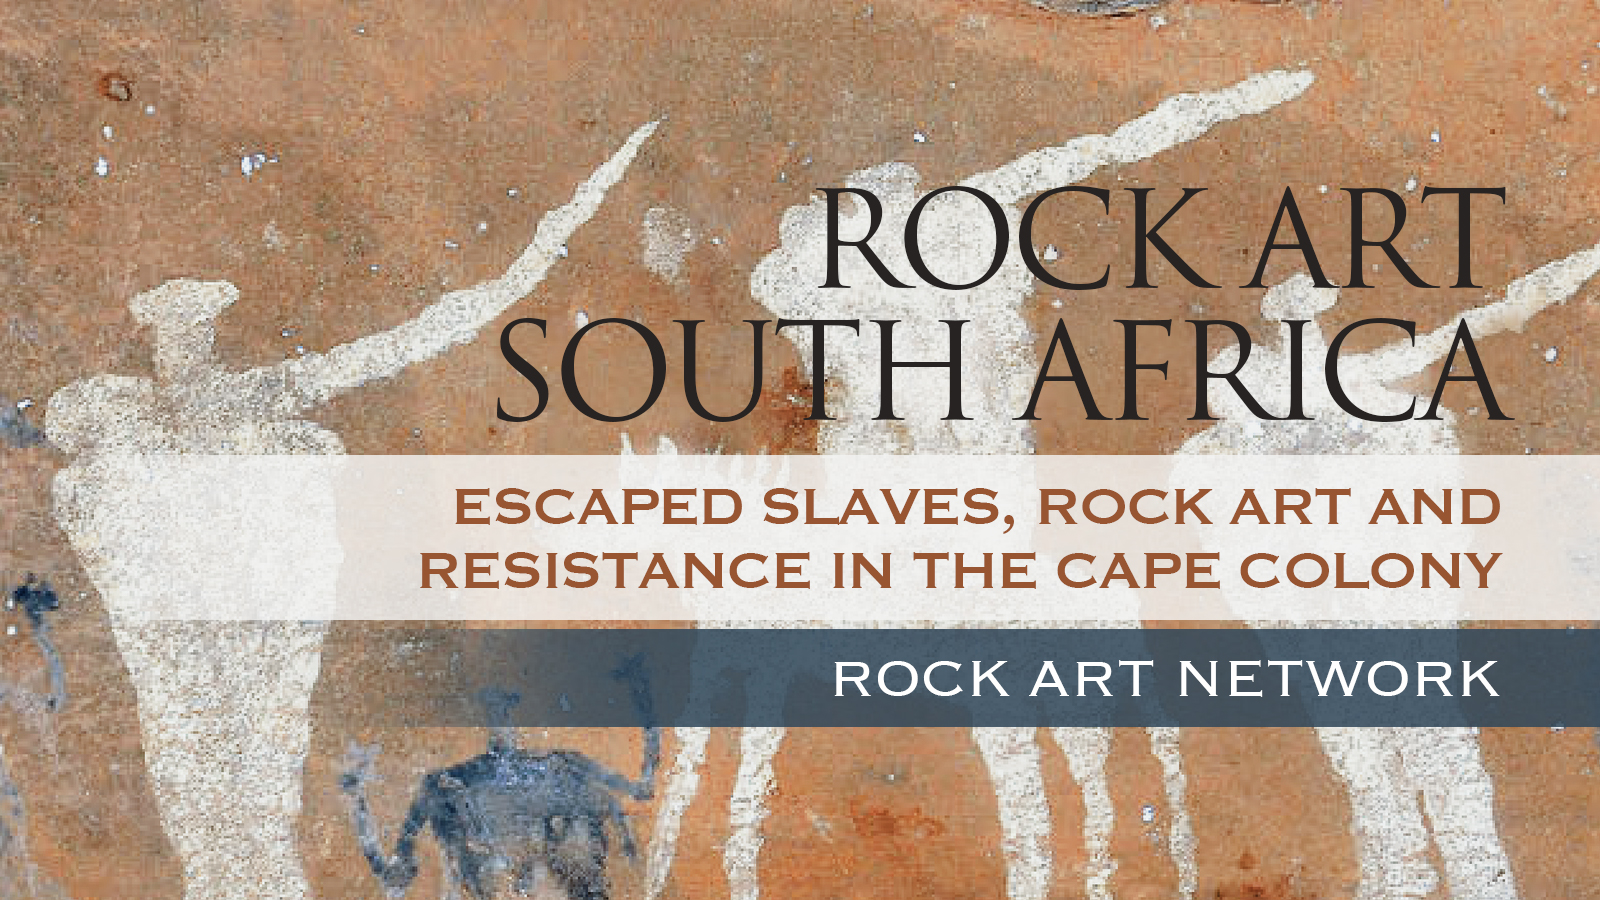 Escaped slaves, rock art and resistance in the Cape Colony, South Africa